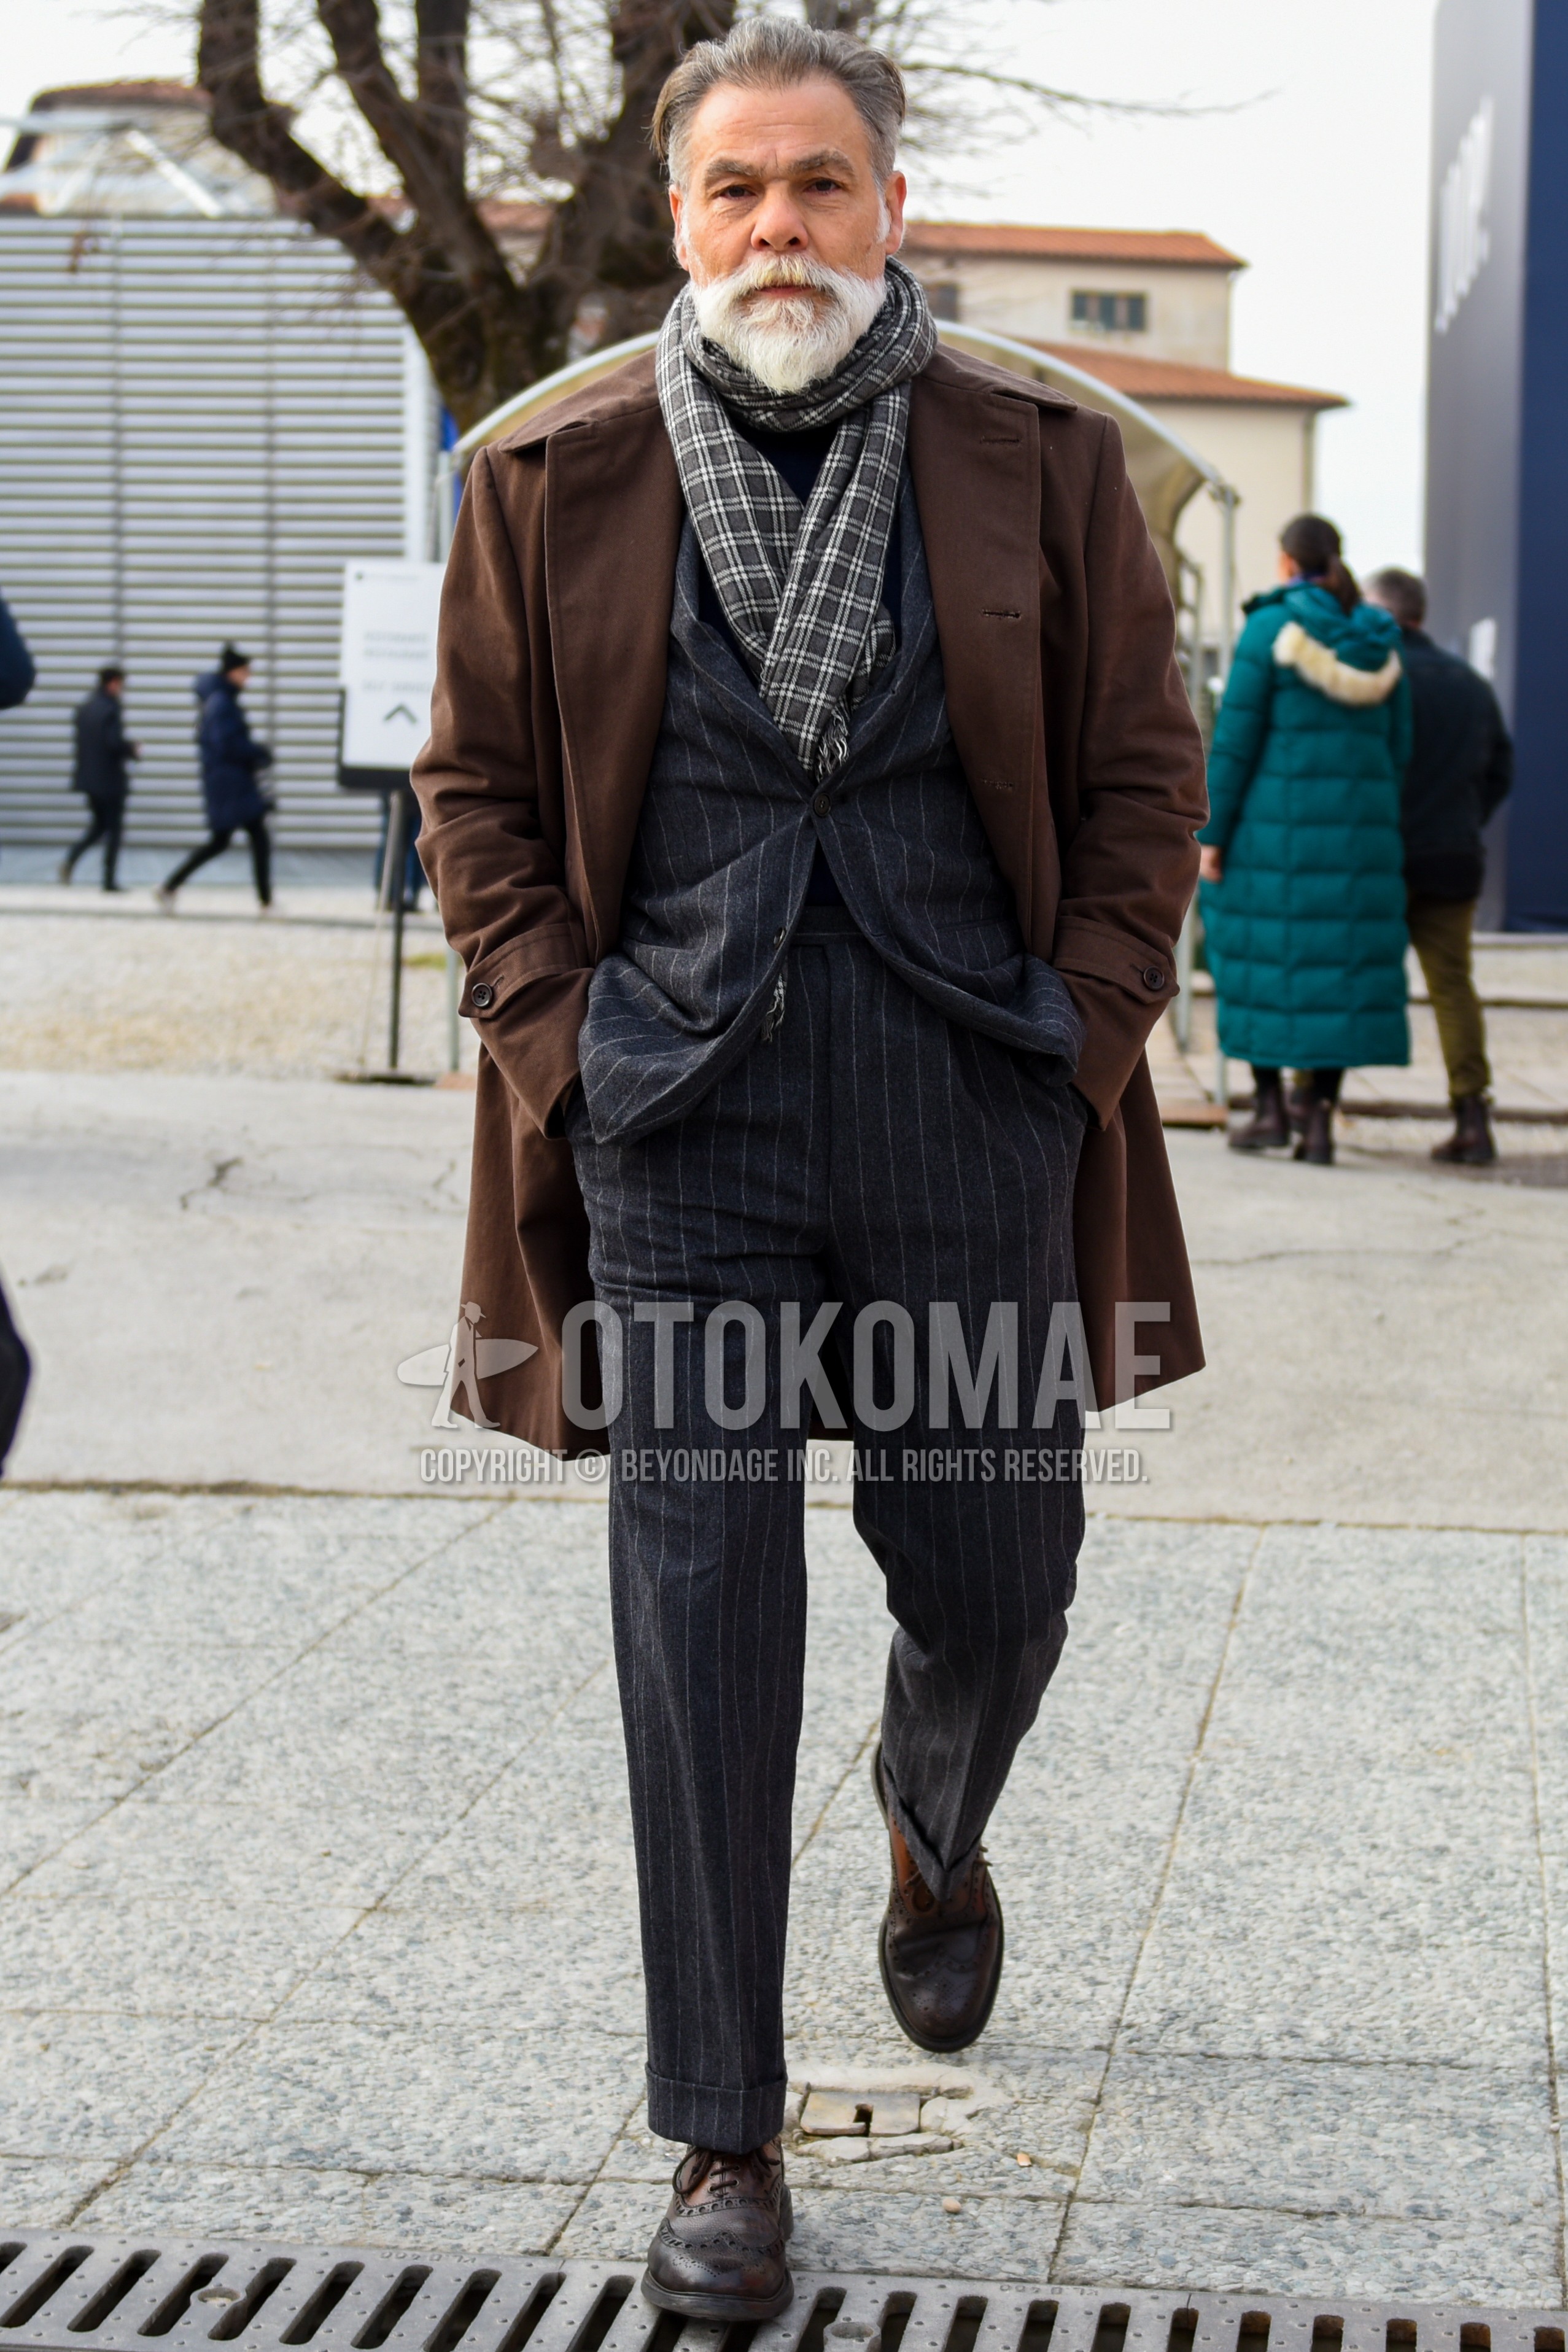 Men's autumn winter outfit with gray check scarf, brown plain trench coat, brown  boots, gray stripes suit.